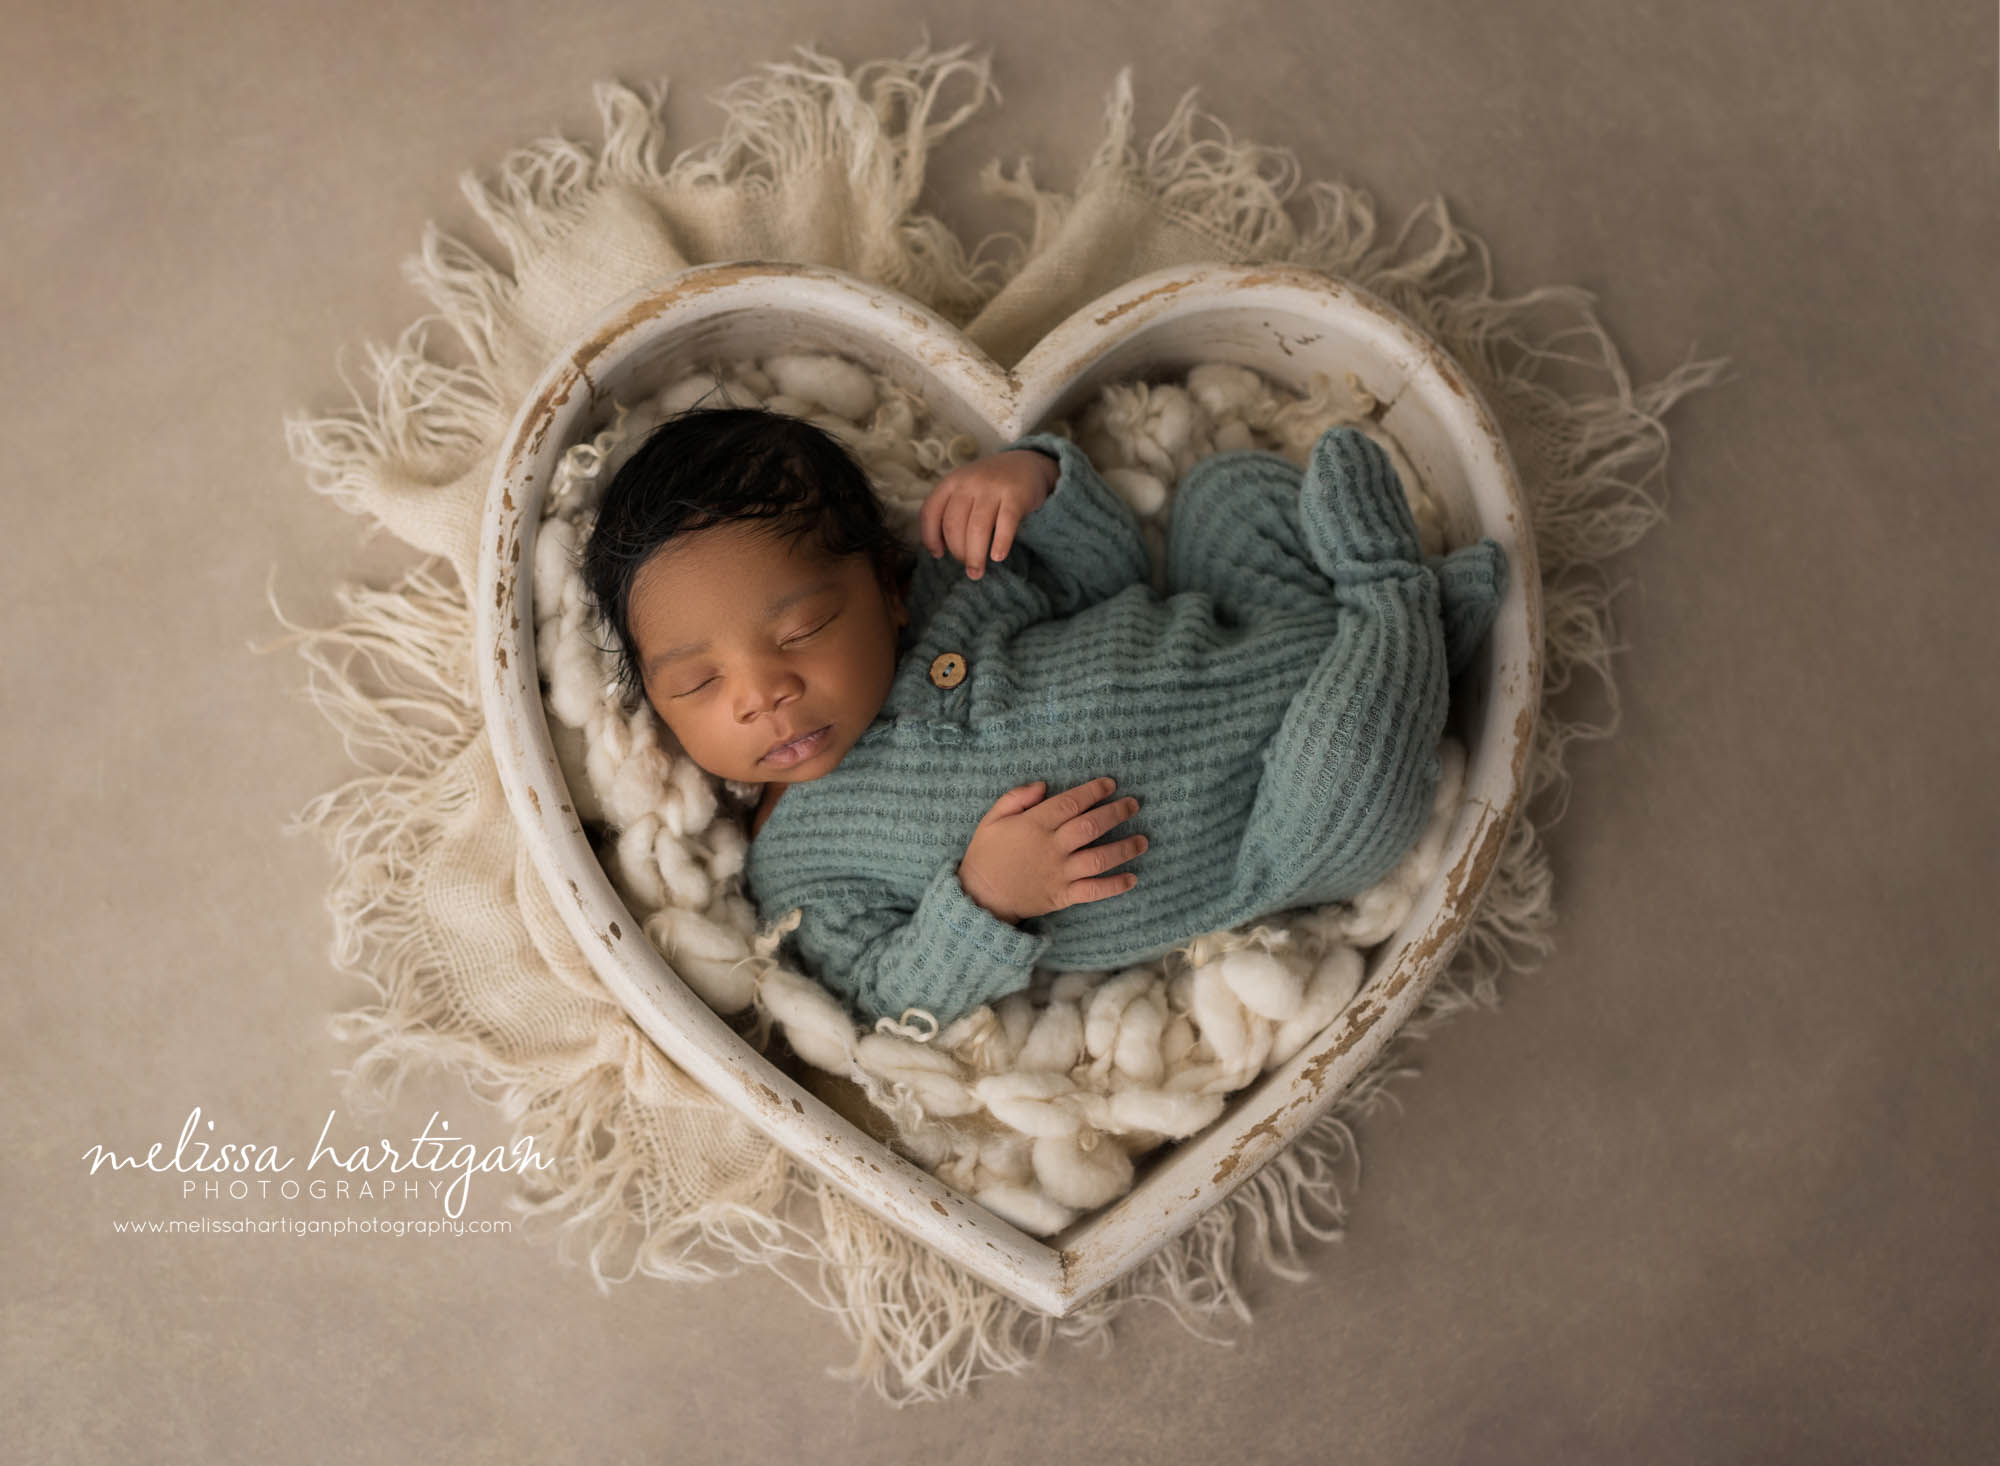 newborn baby boy posed in wooden cream heart bowl wearing soft green knitted footed sleeper